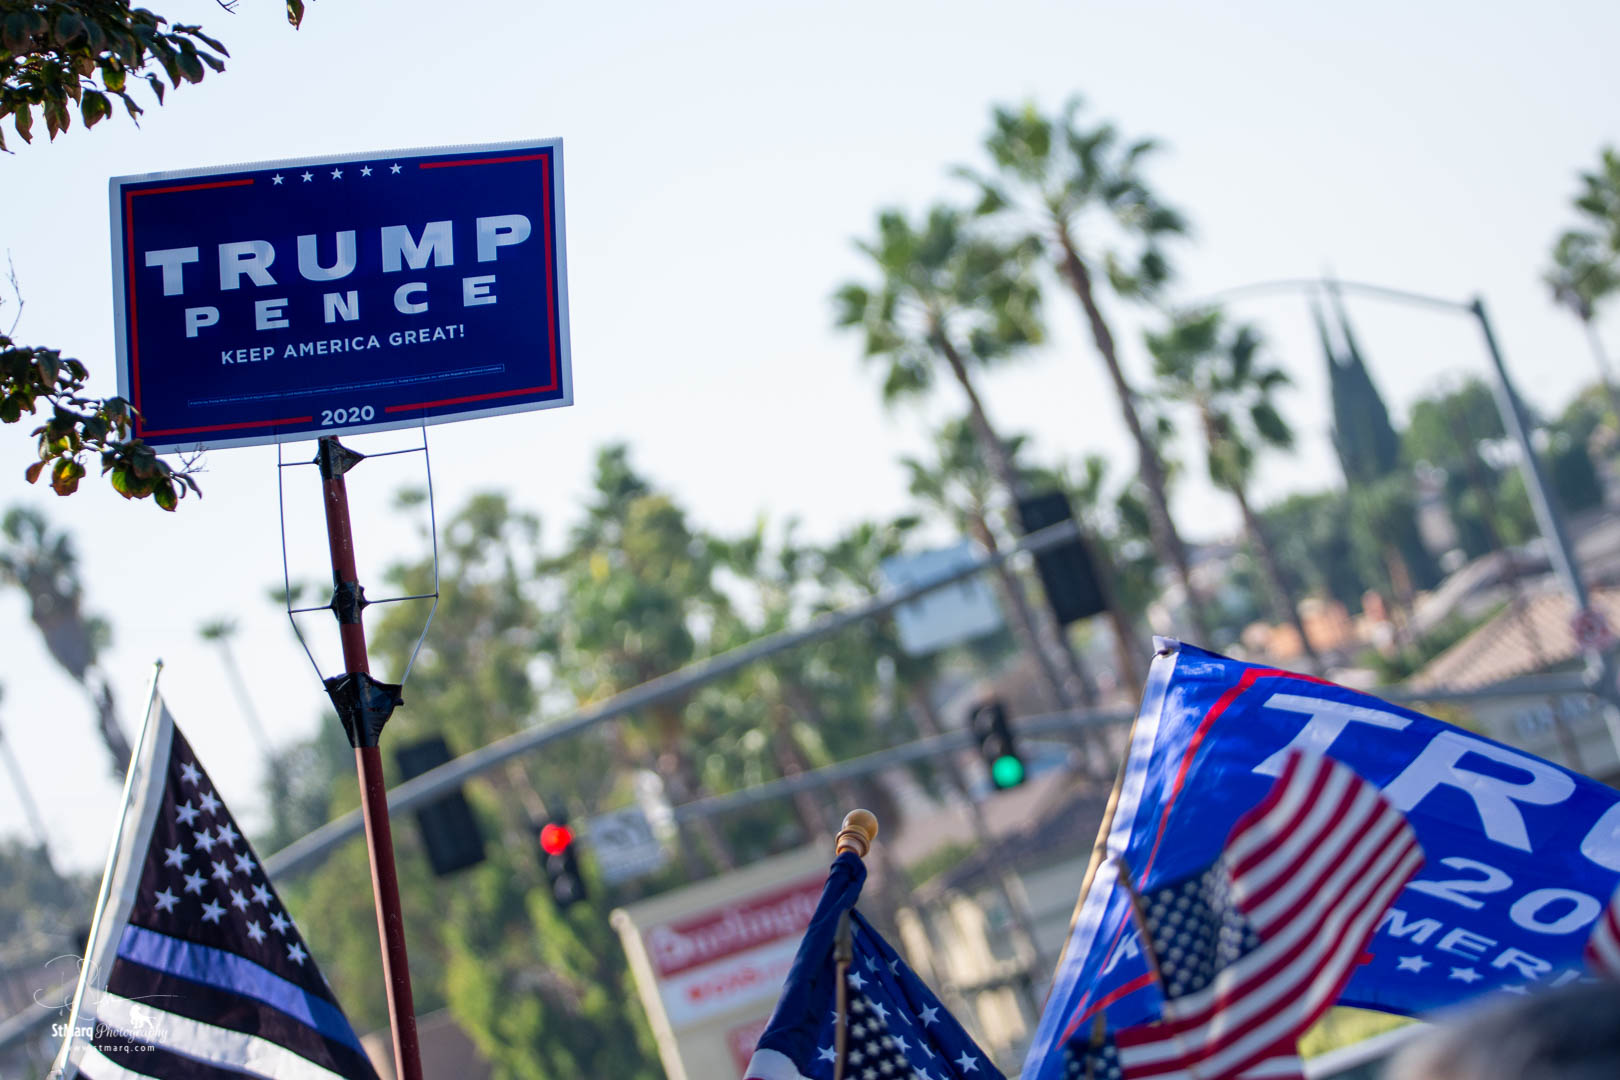 Backers of president Trump hold flags to show their support on the corner of Beach Blvd. and Imperial Highway in La Habra, CA on Sunday, October 18, 2020. They were attempting to show that California has supporters of the president even though it is usually written off as a Democrat stronghold.